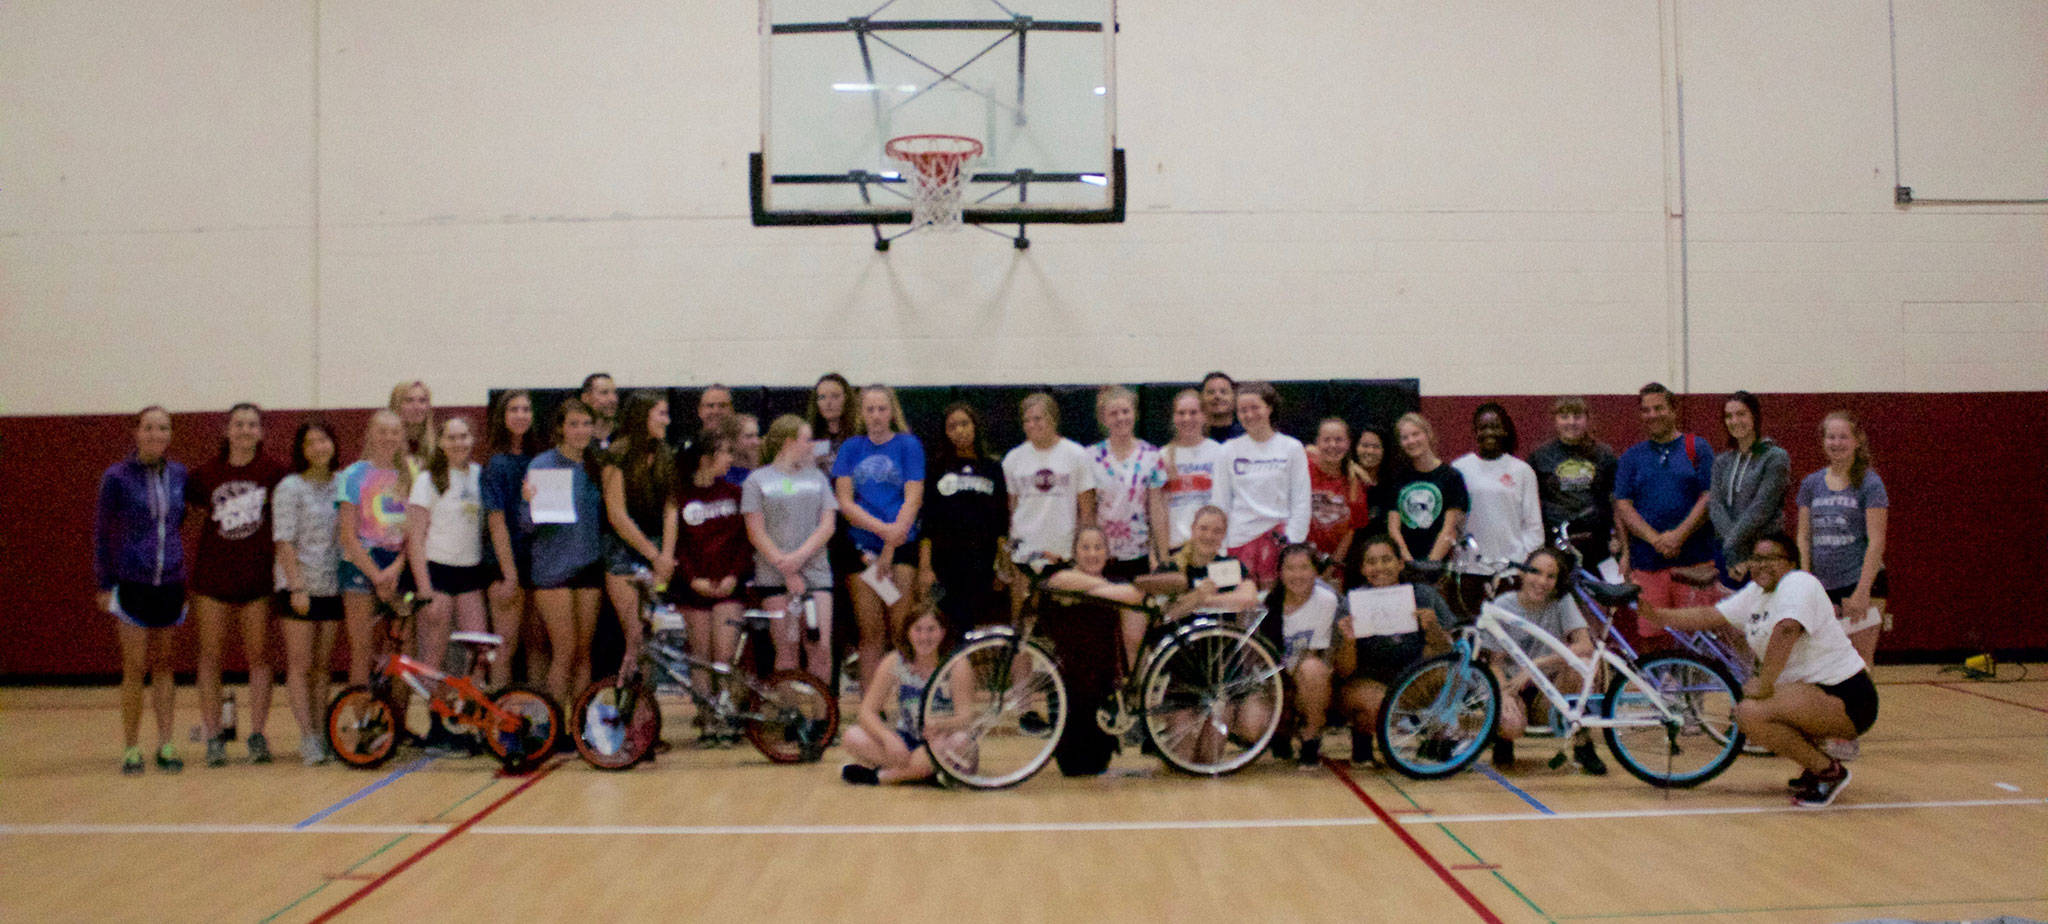 MIHS girls’ volleyball team bonds by building bikes